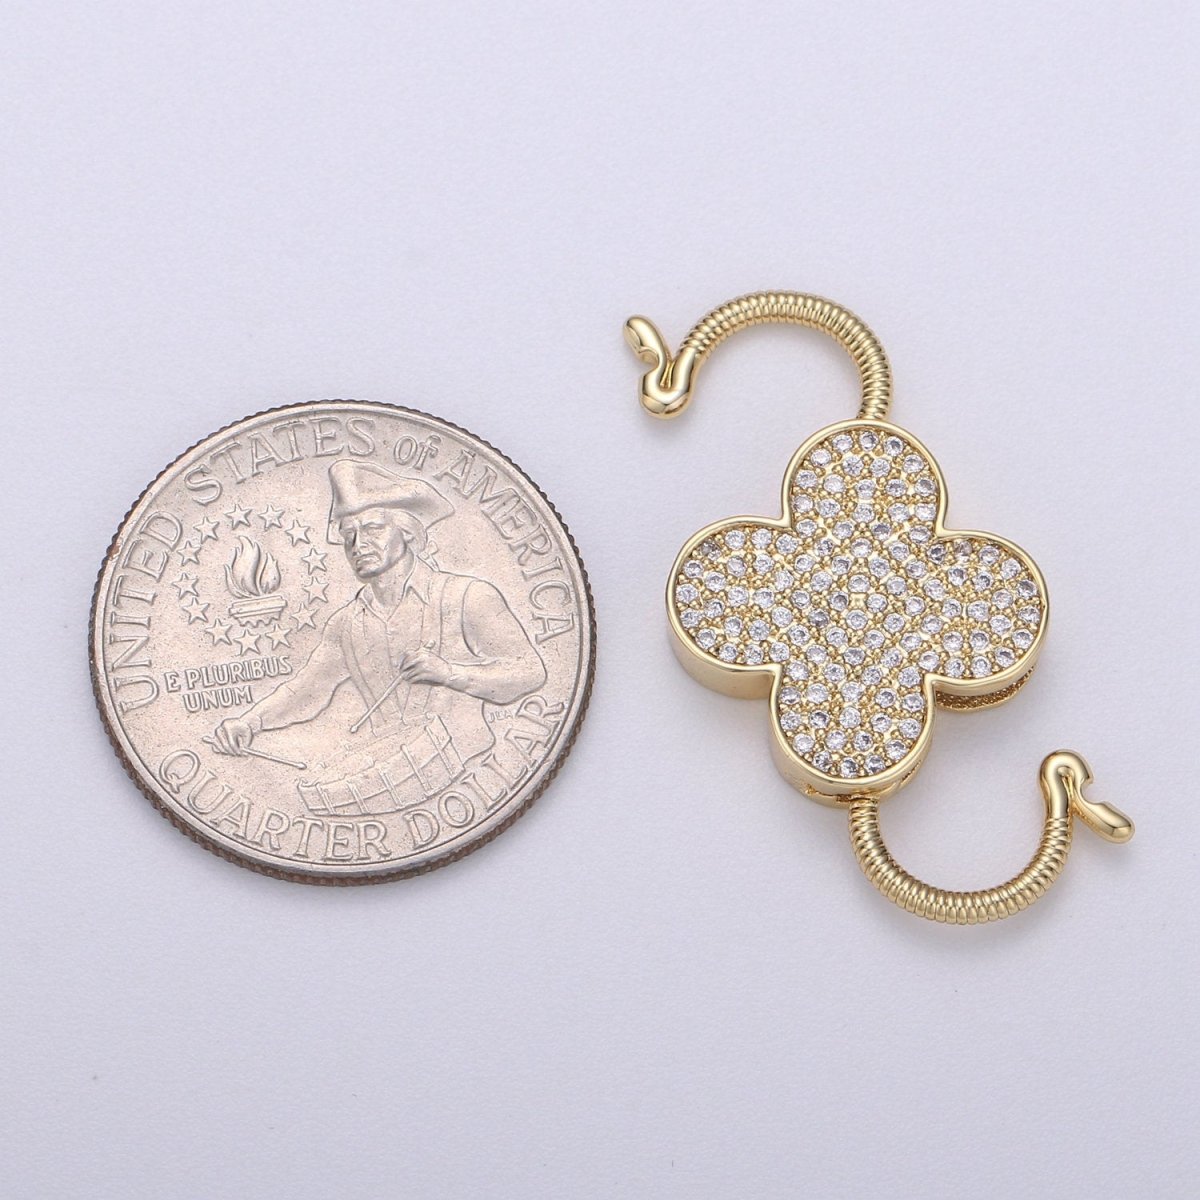 14k Gold Filled Clasp clicker Clover Clasp, 16x27mm, Flower Clover double Clicker ends, Bracelet Necklace Clicker Connector K-911 - DLUXCA